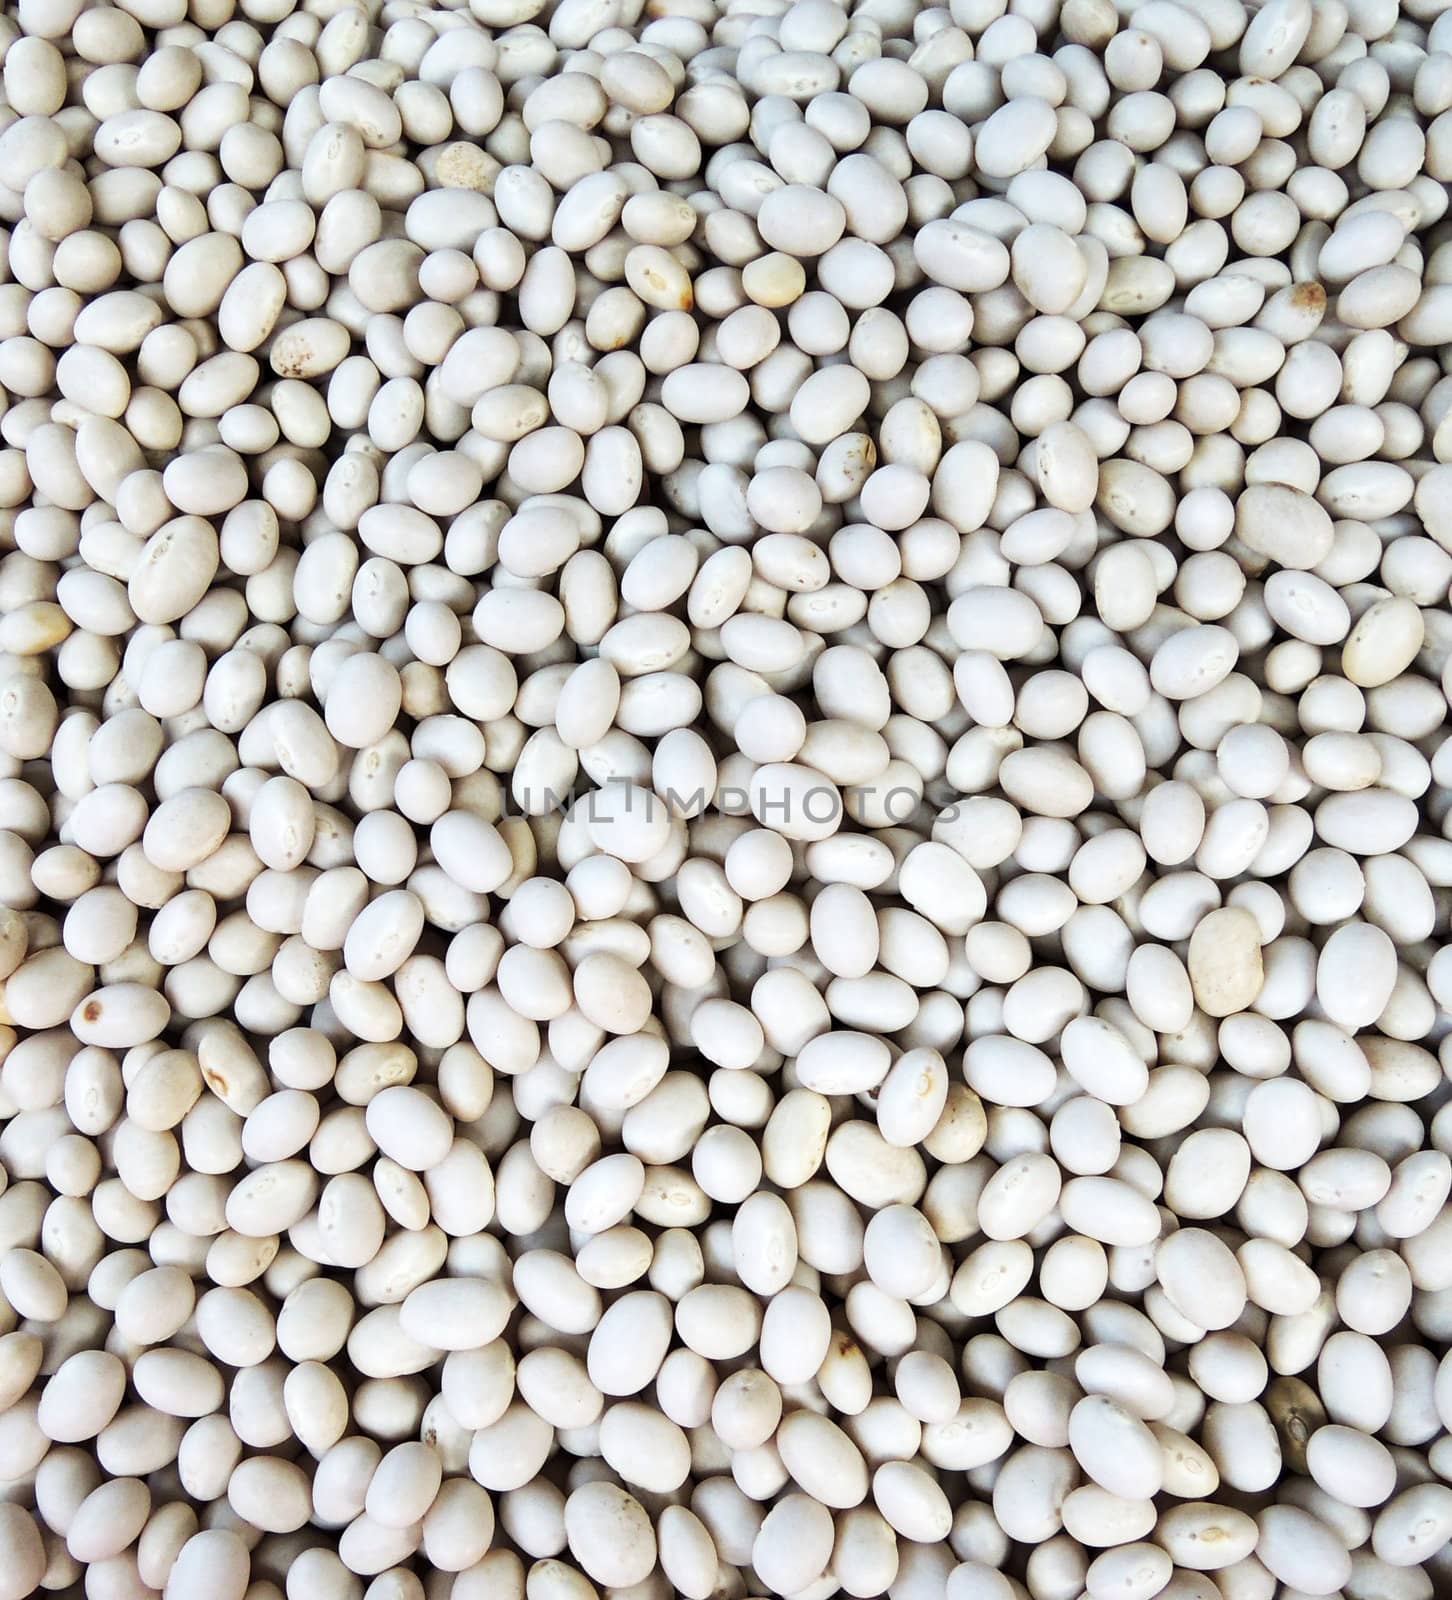 Soy bean background